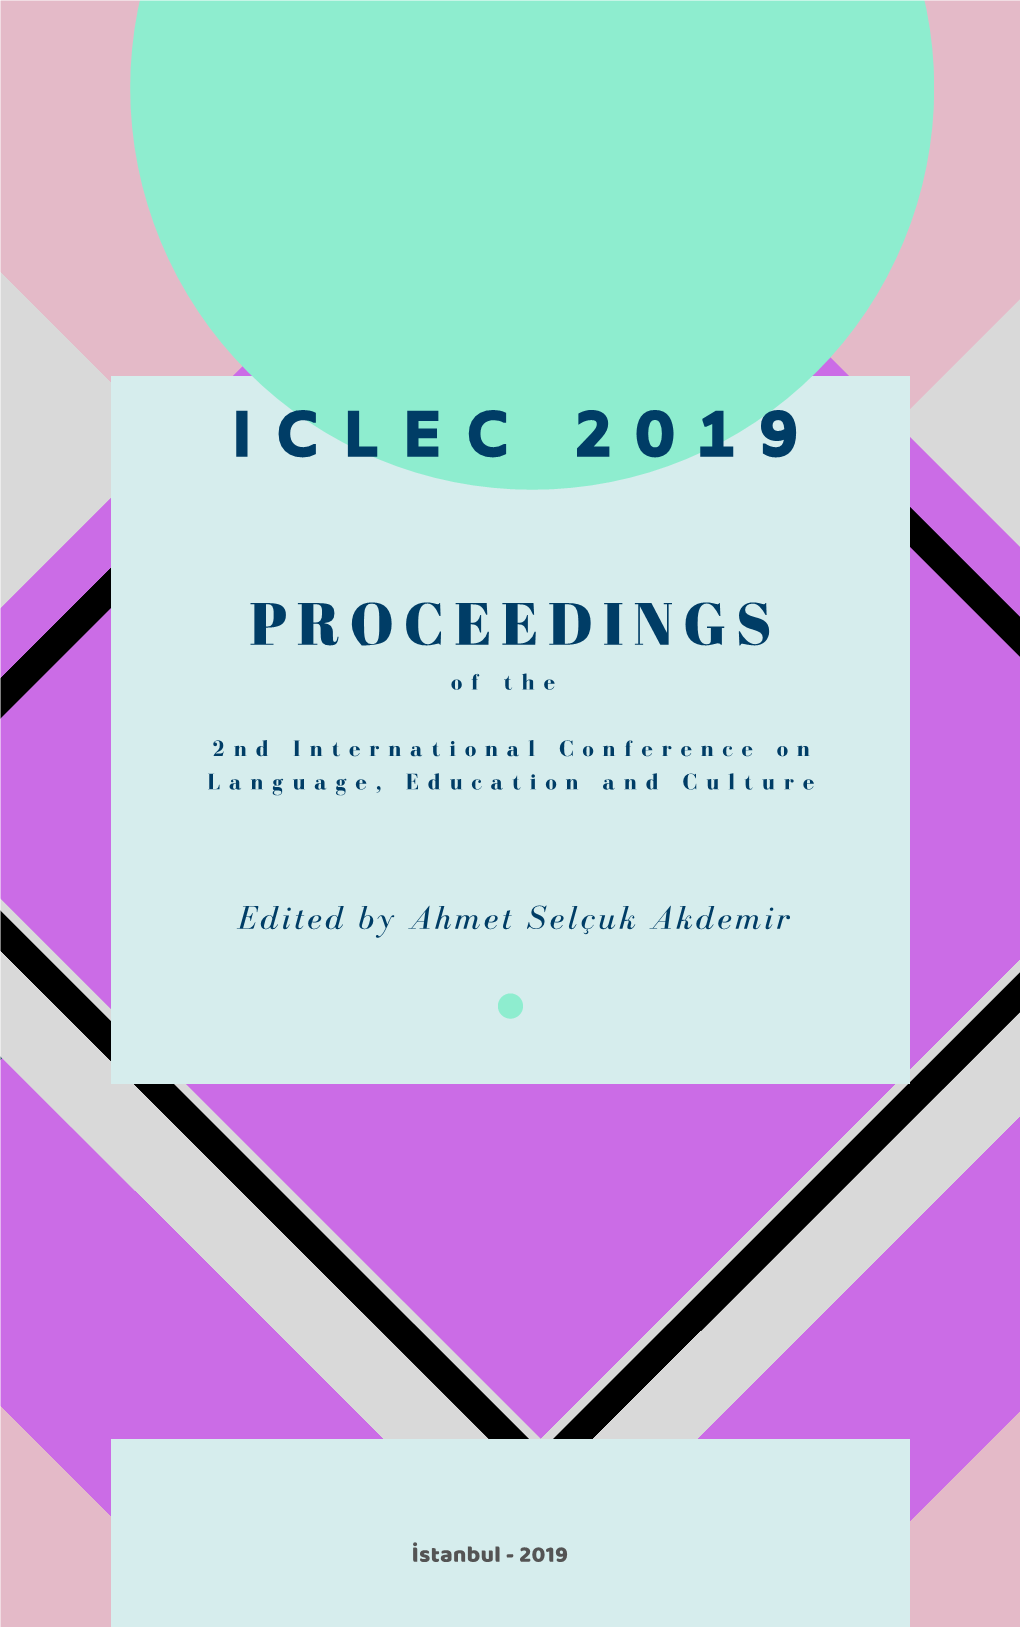 ICLEC 2019 Book of Full Texts